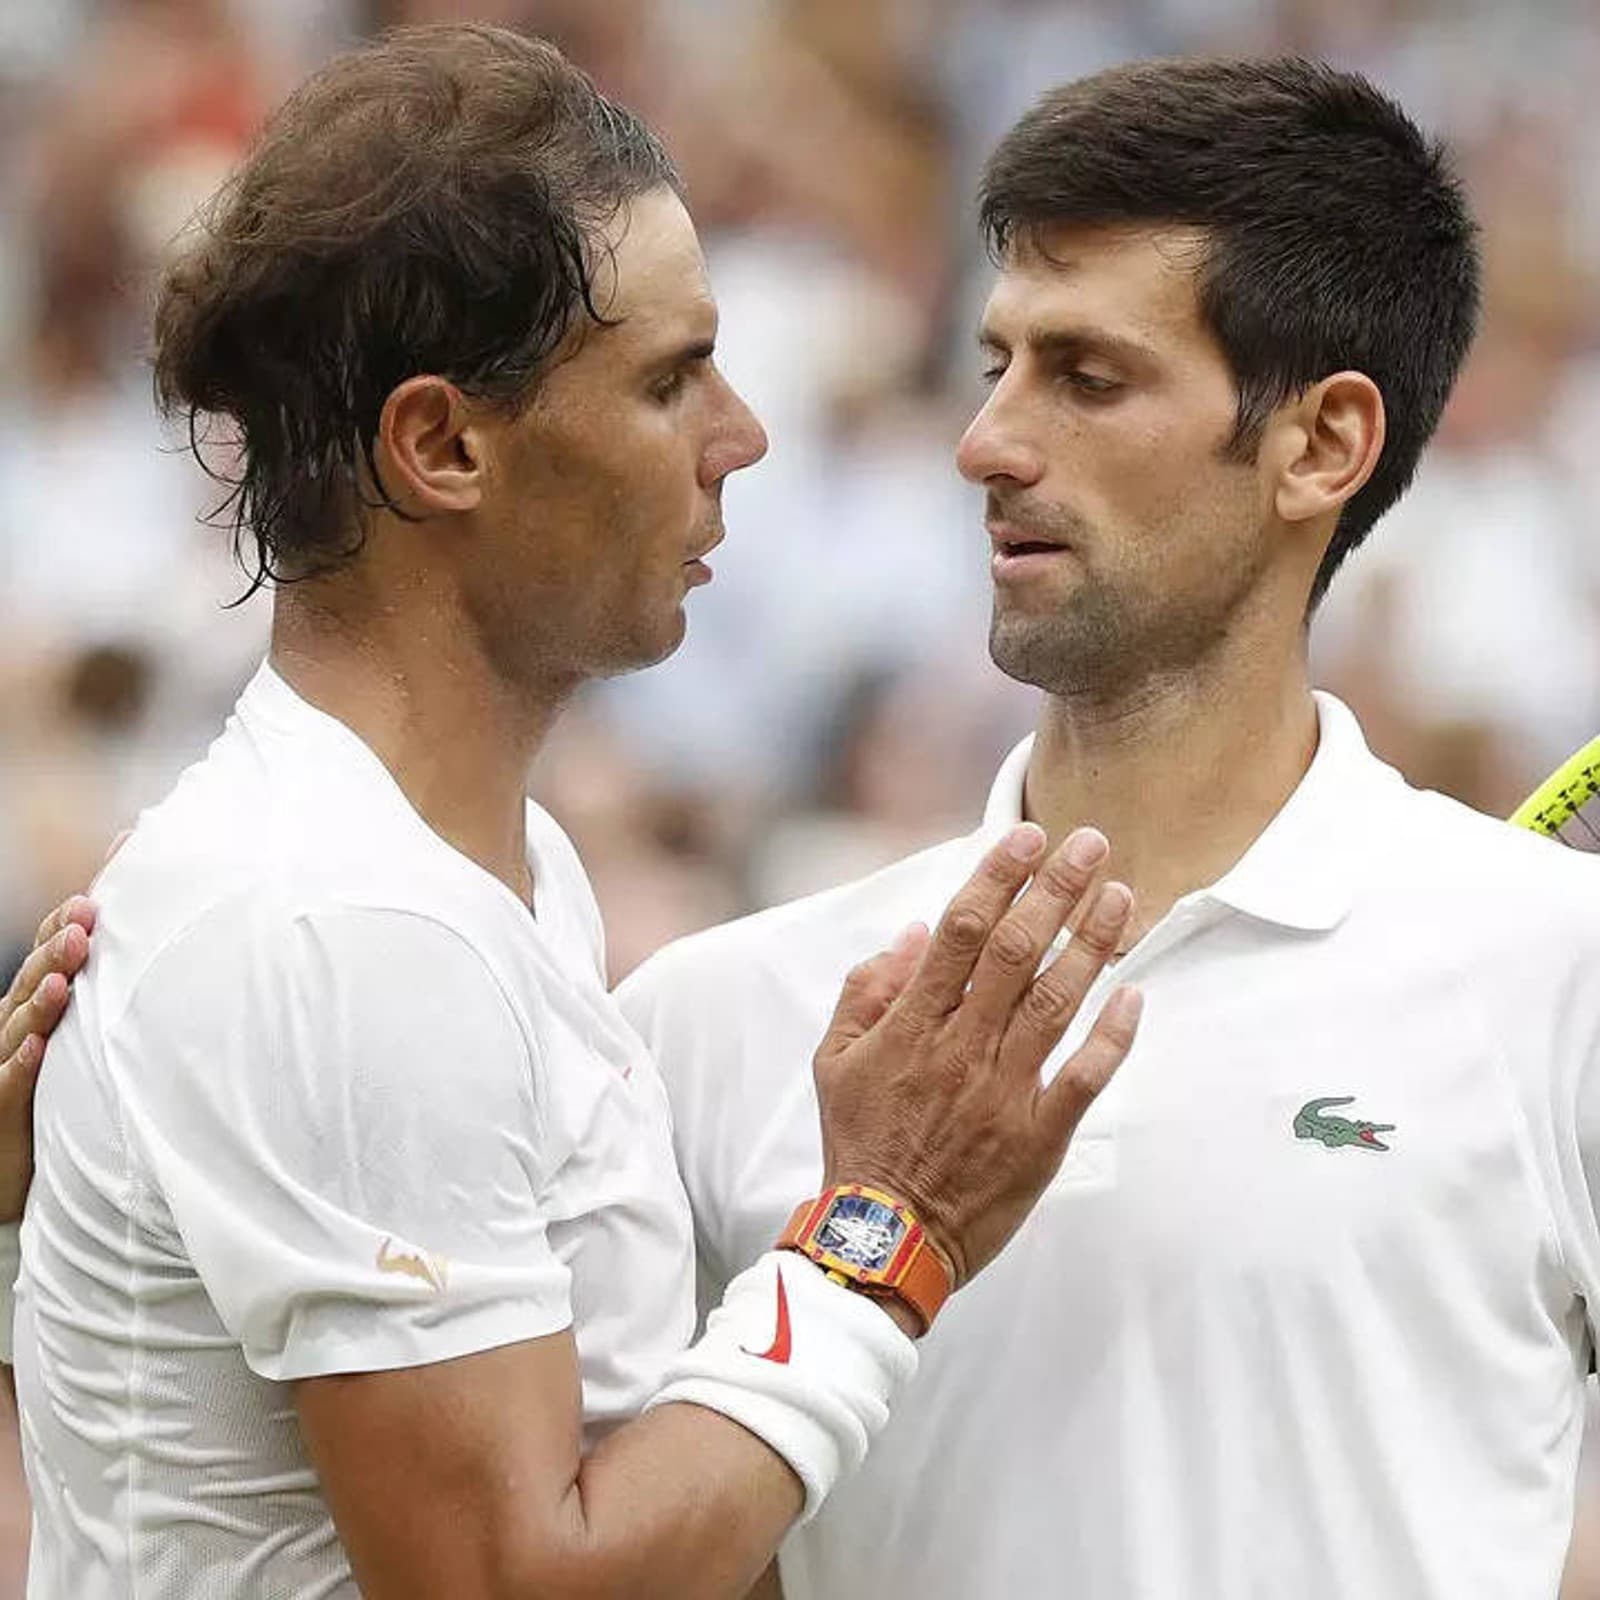 Rafael Nadal Eyes 23rd Major After Doubts on Unvaccinated Novak Djokovics Entry in US Open